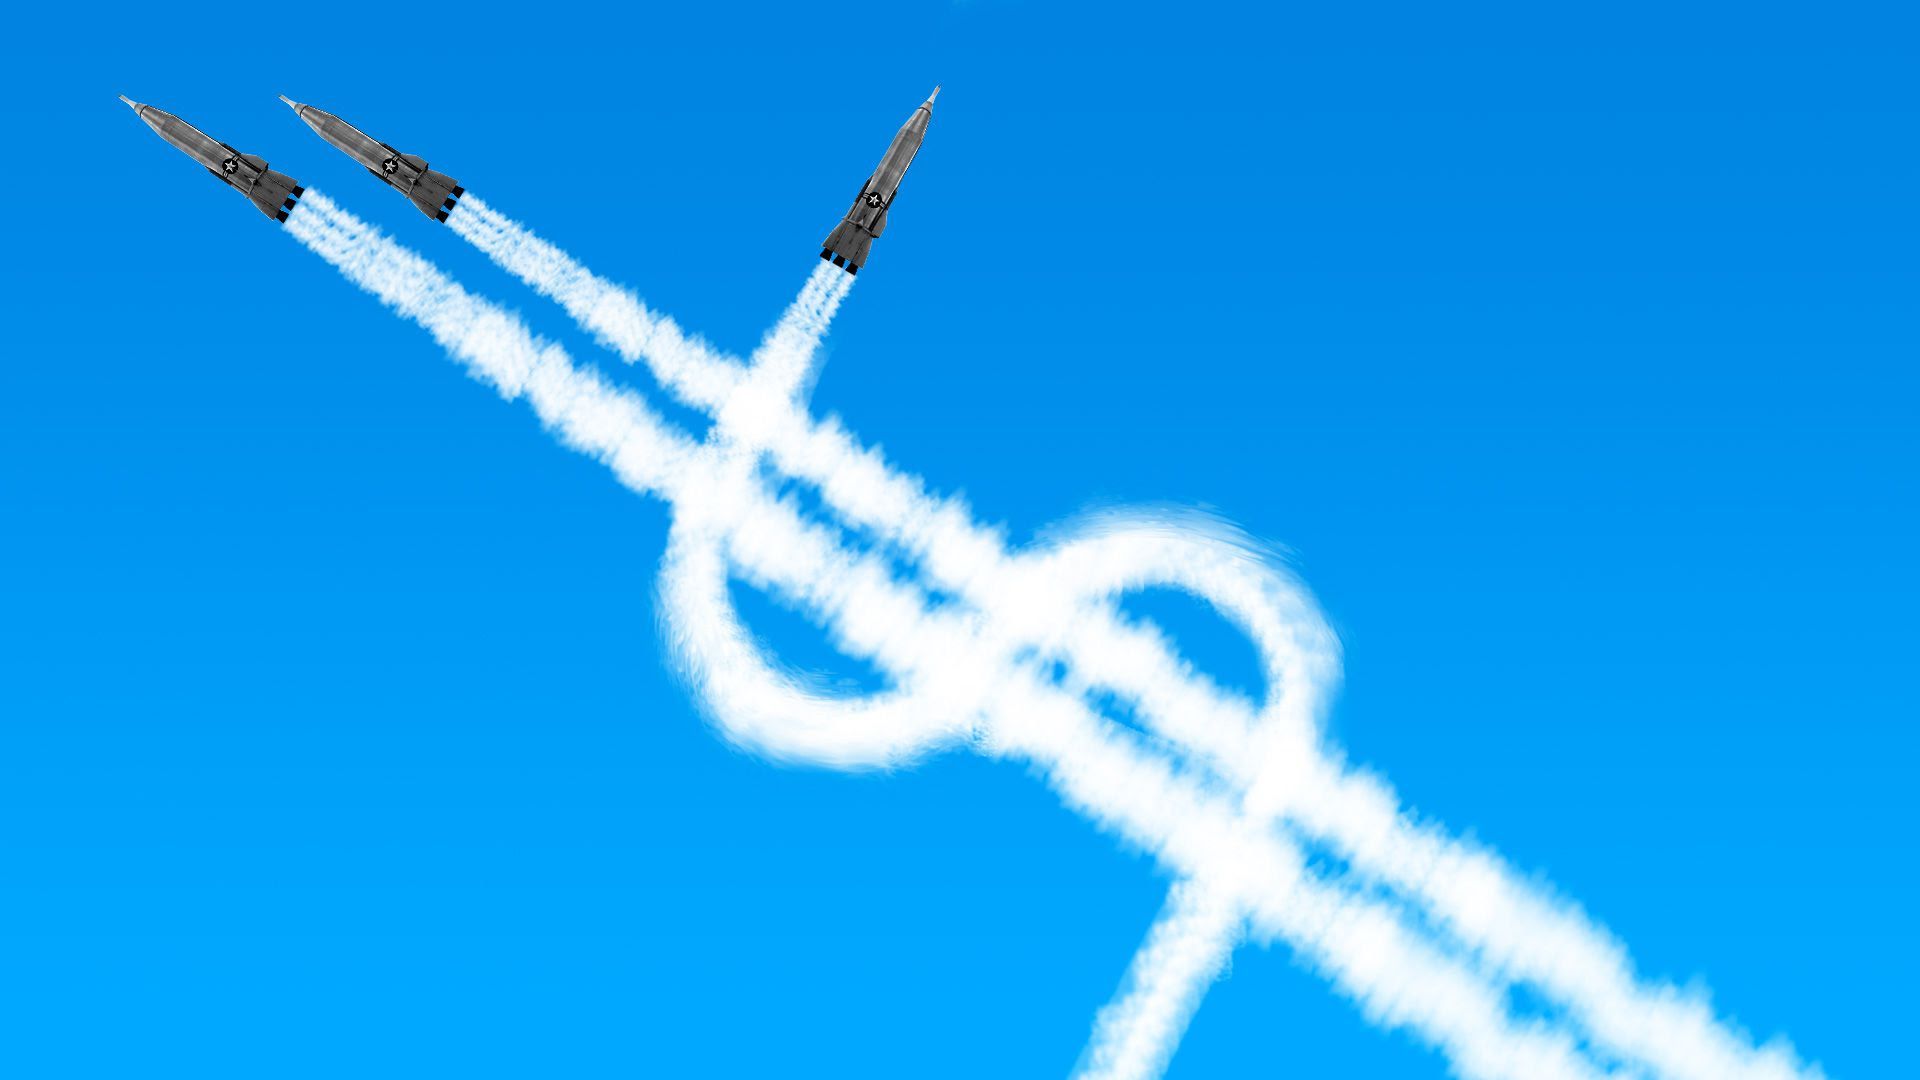 Three jets leave a trail of fumes as they fly that creates a money symbol.